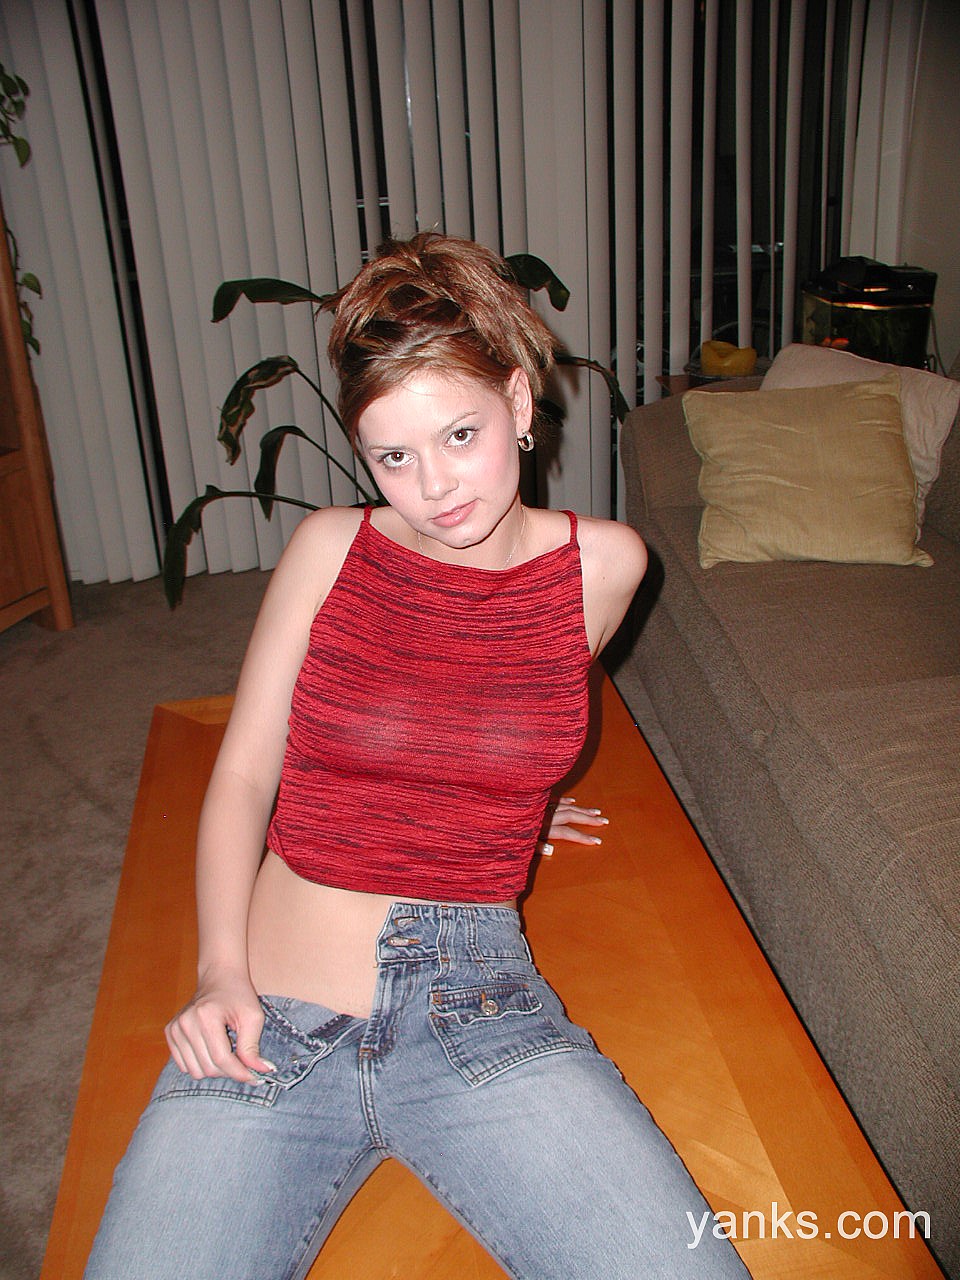 Redhead teen Kelly flaunts sexy feet & sheds jeans to show natural hairy bush 色情照片 #423309527 | Yanks Pics, Kelly, Amateur, 手机色情